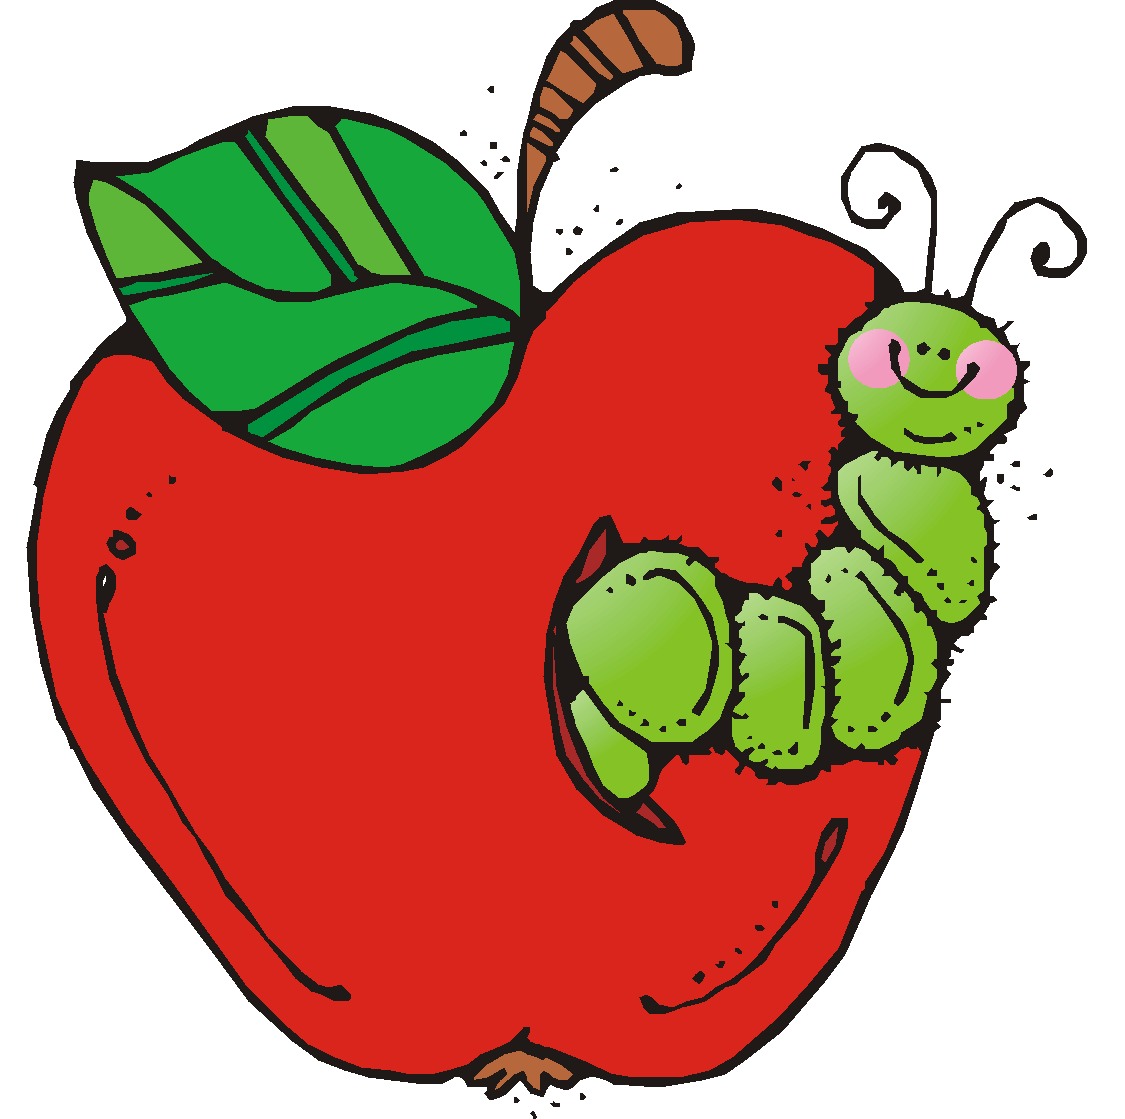 Worm and Apple